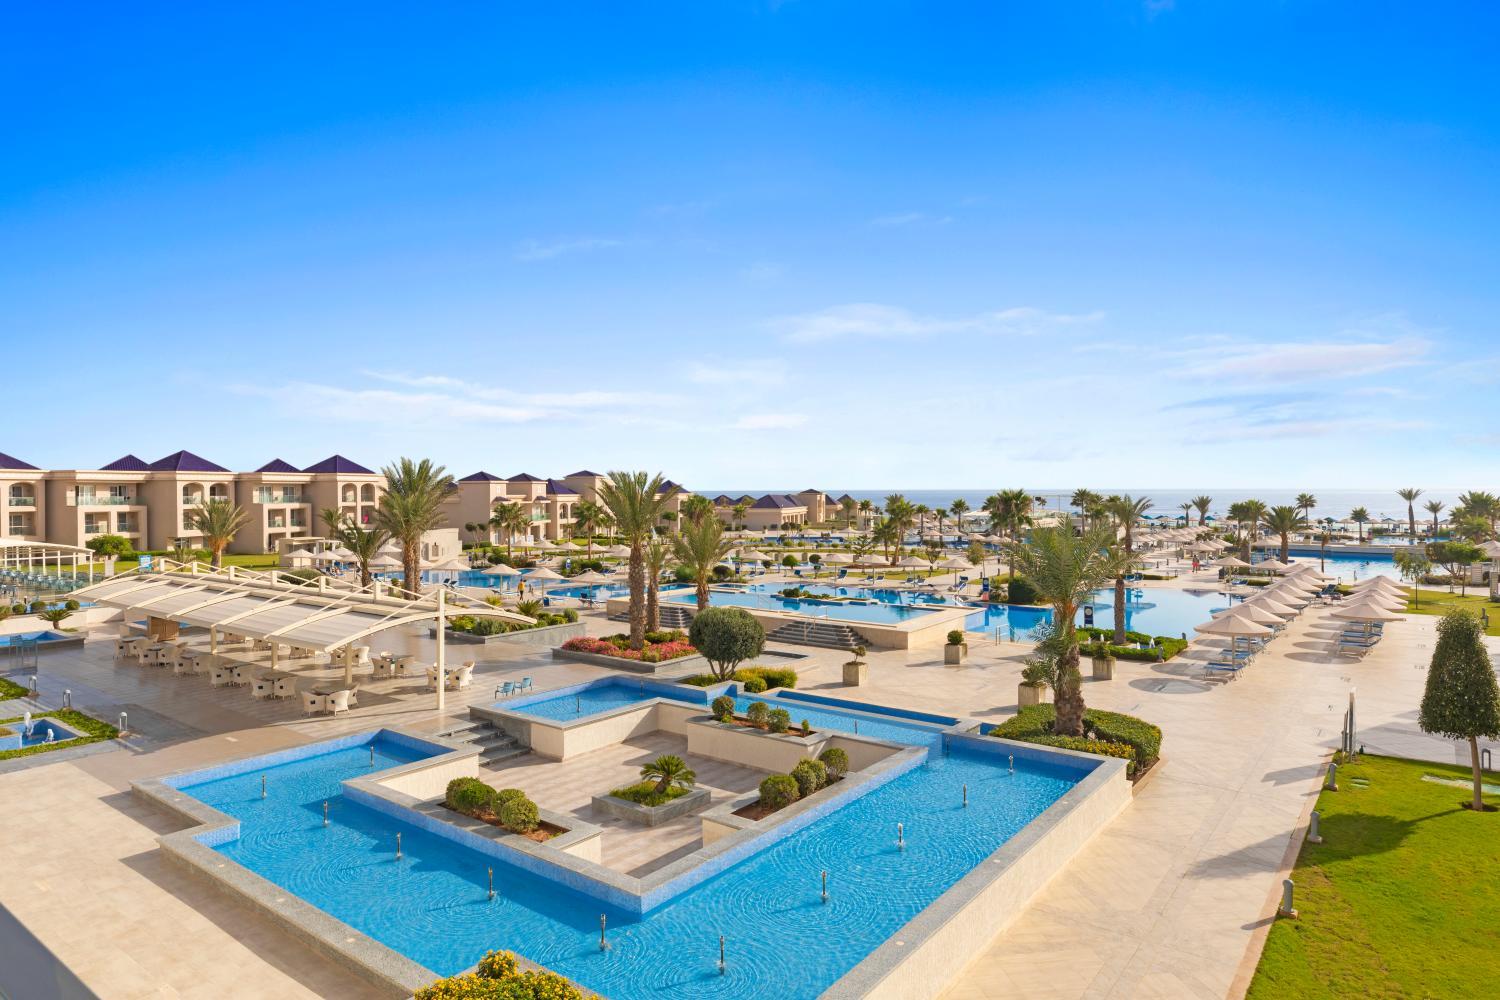 Hotel for Adults-only - Pickalbatros White Beach Taghazout - Adults Friendly 16 Years Plus - All Inclusive